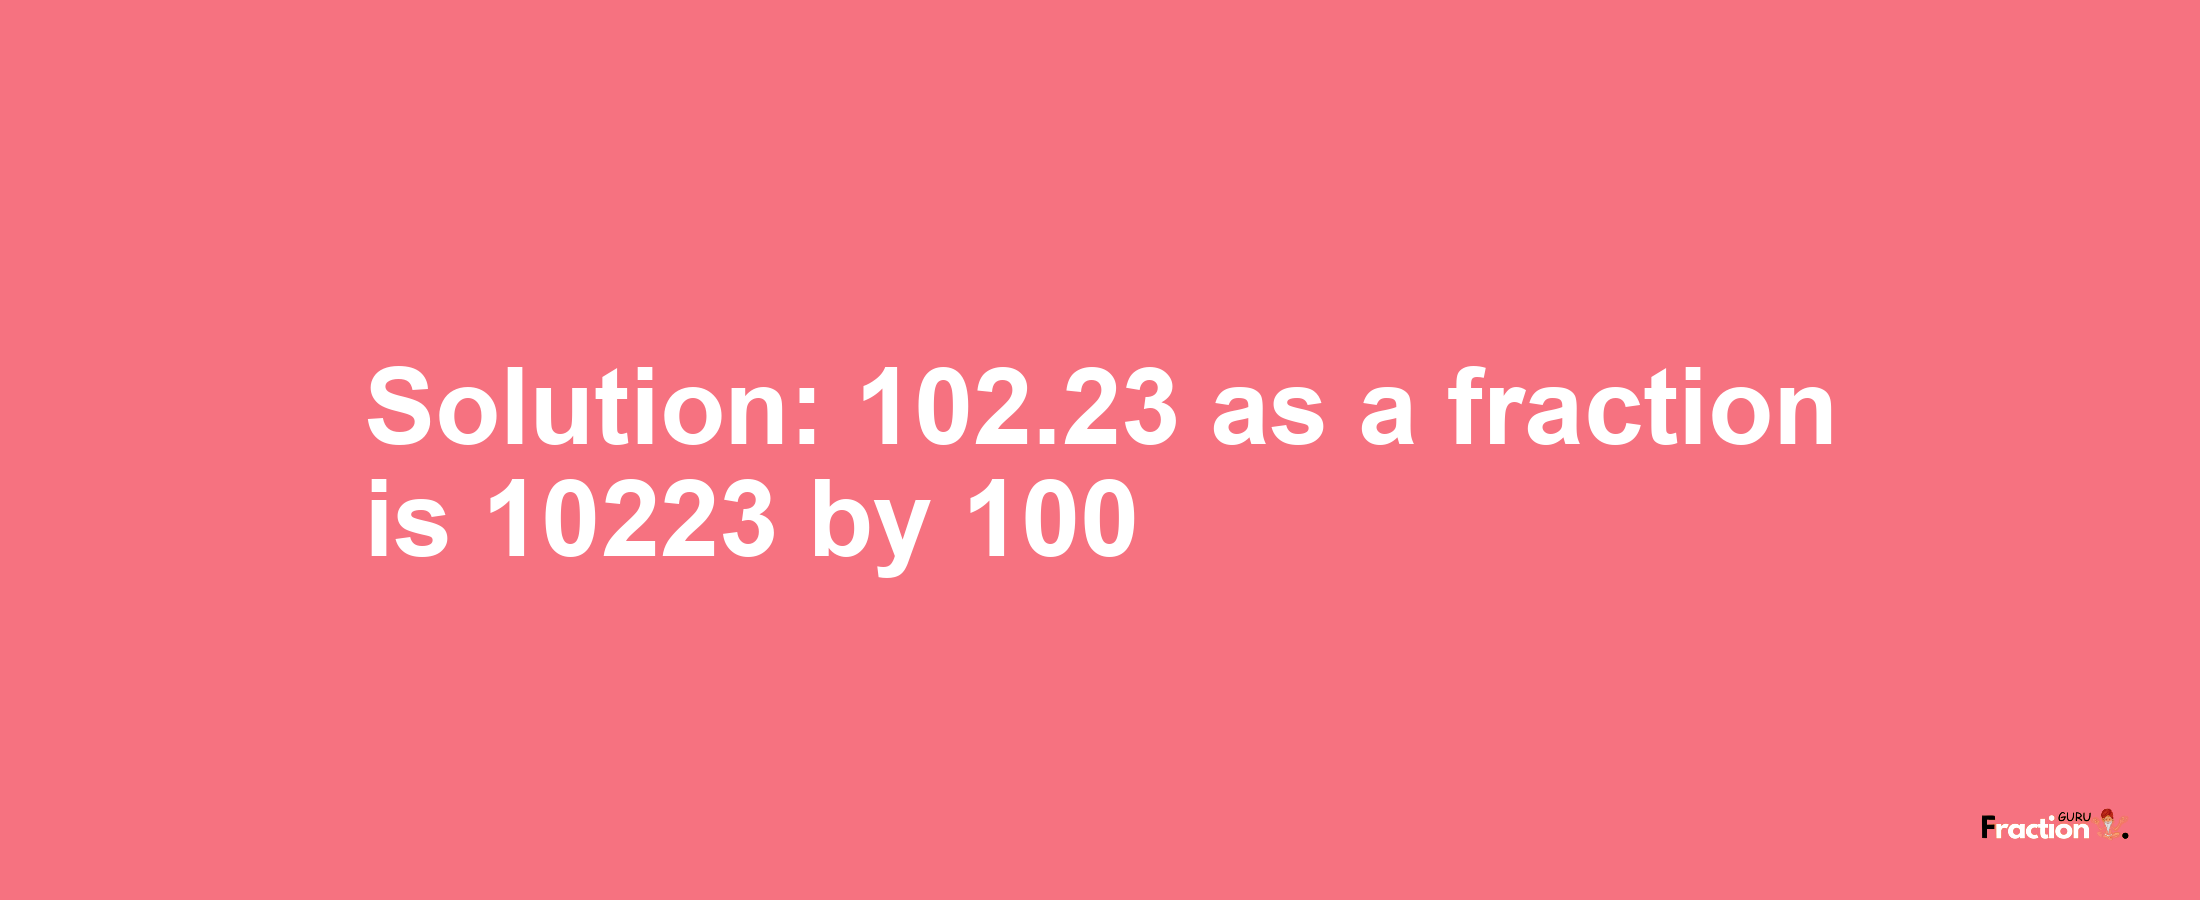 Solution:102.23 as a fraction is 10223/100